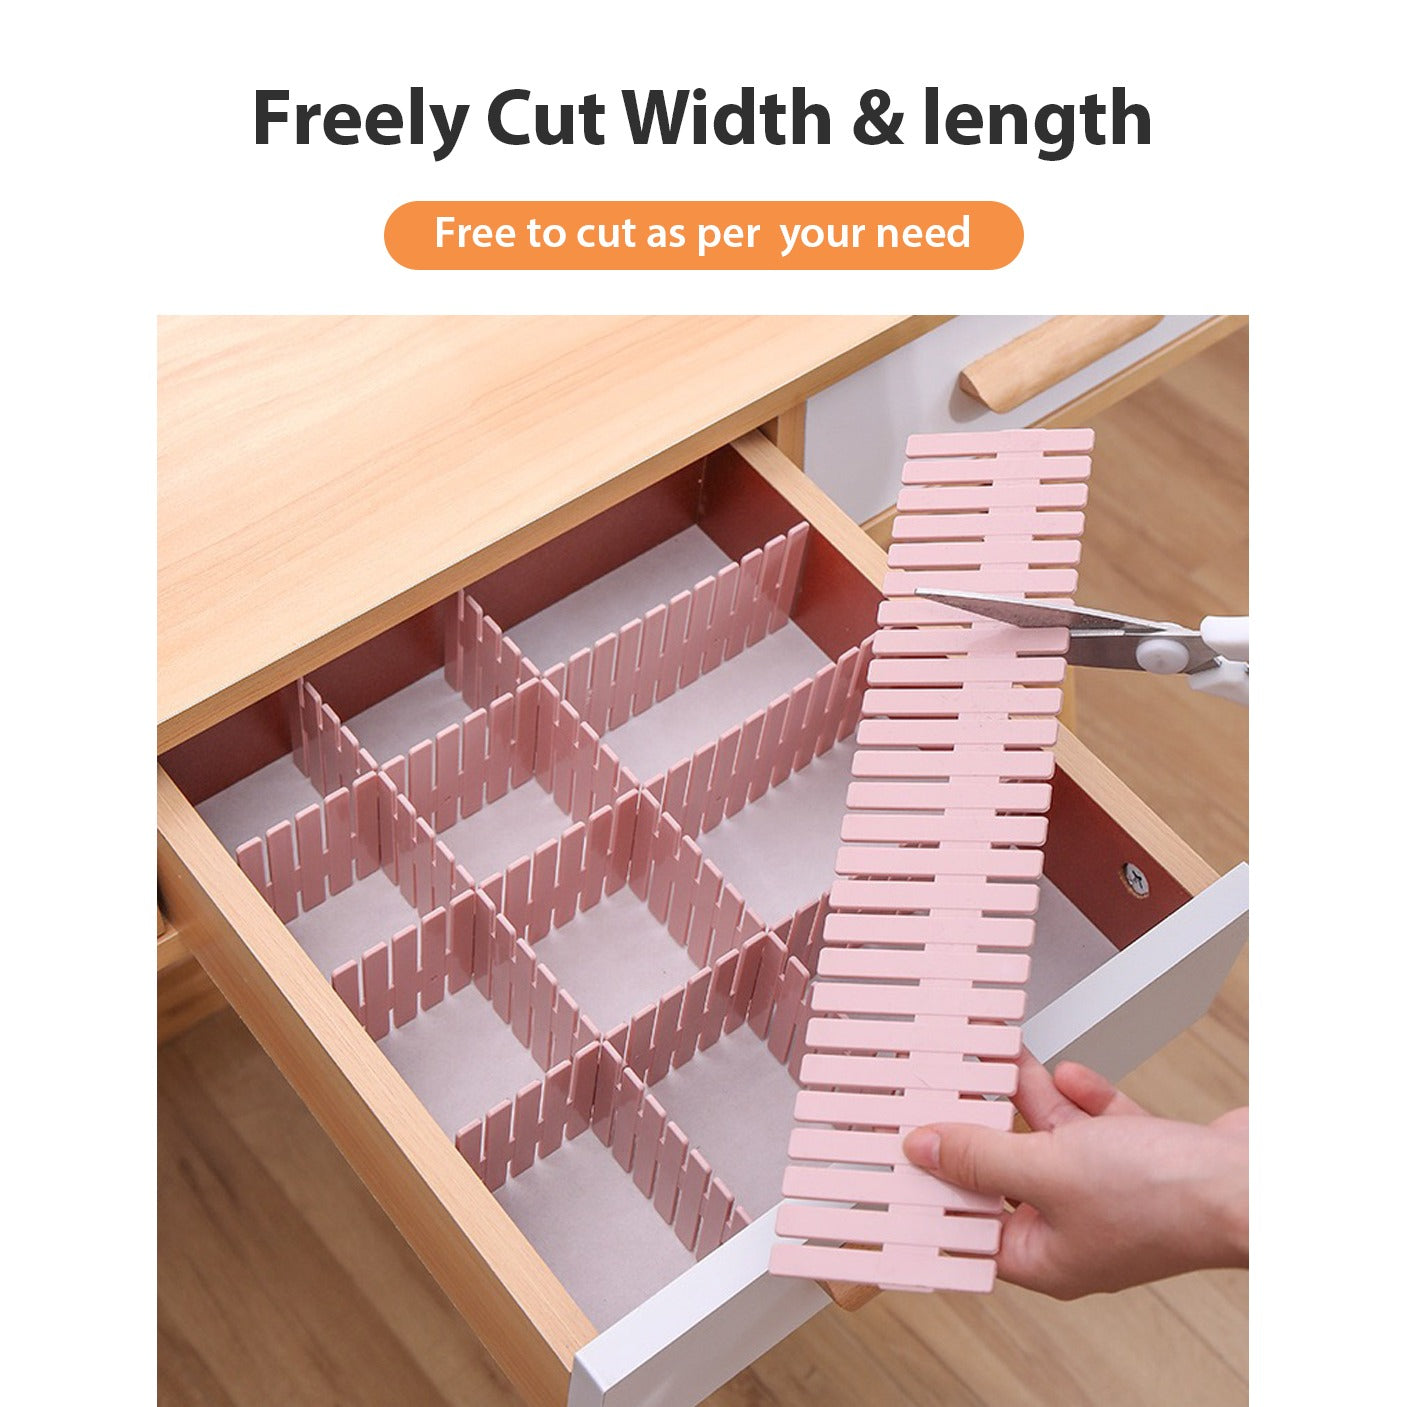 Adjustable Drawer Dividers - Adjustable size by cutting 